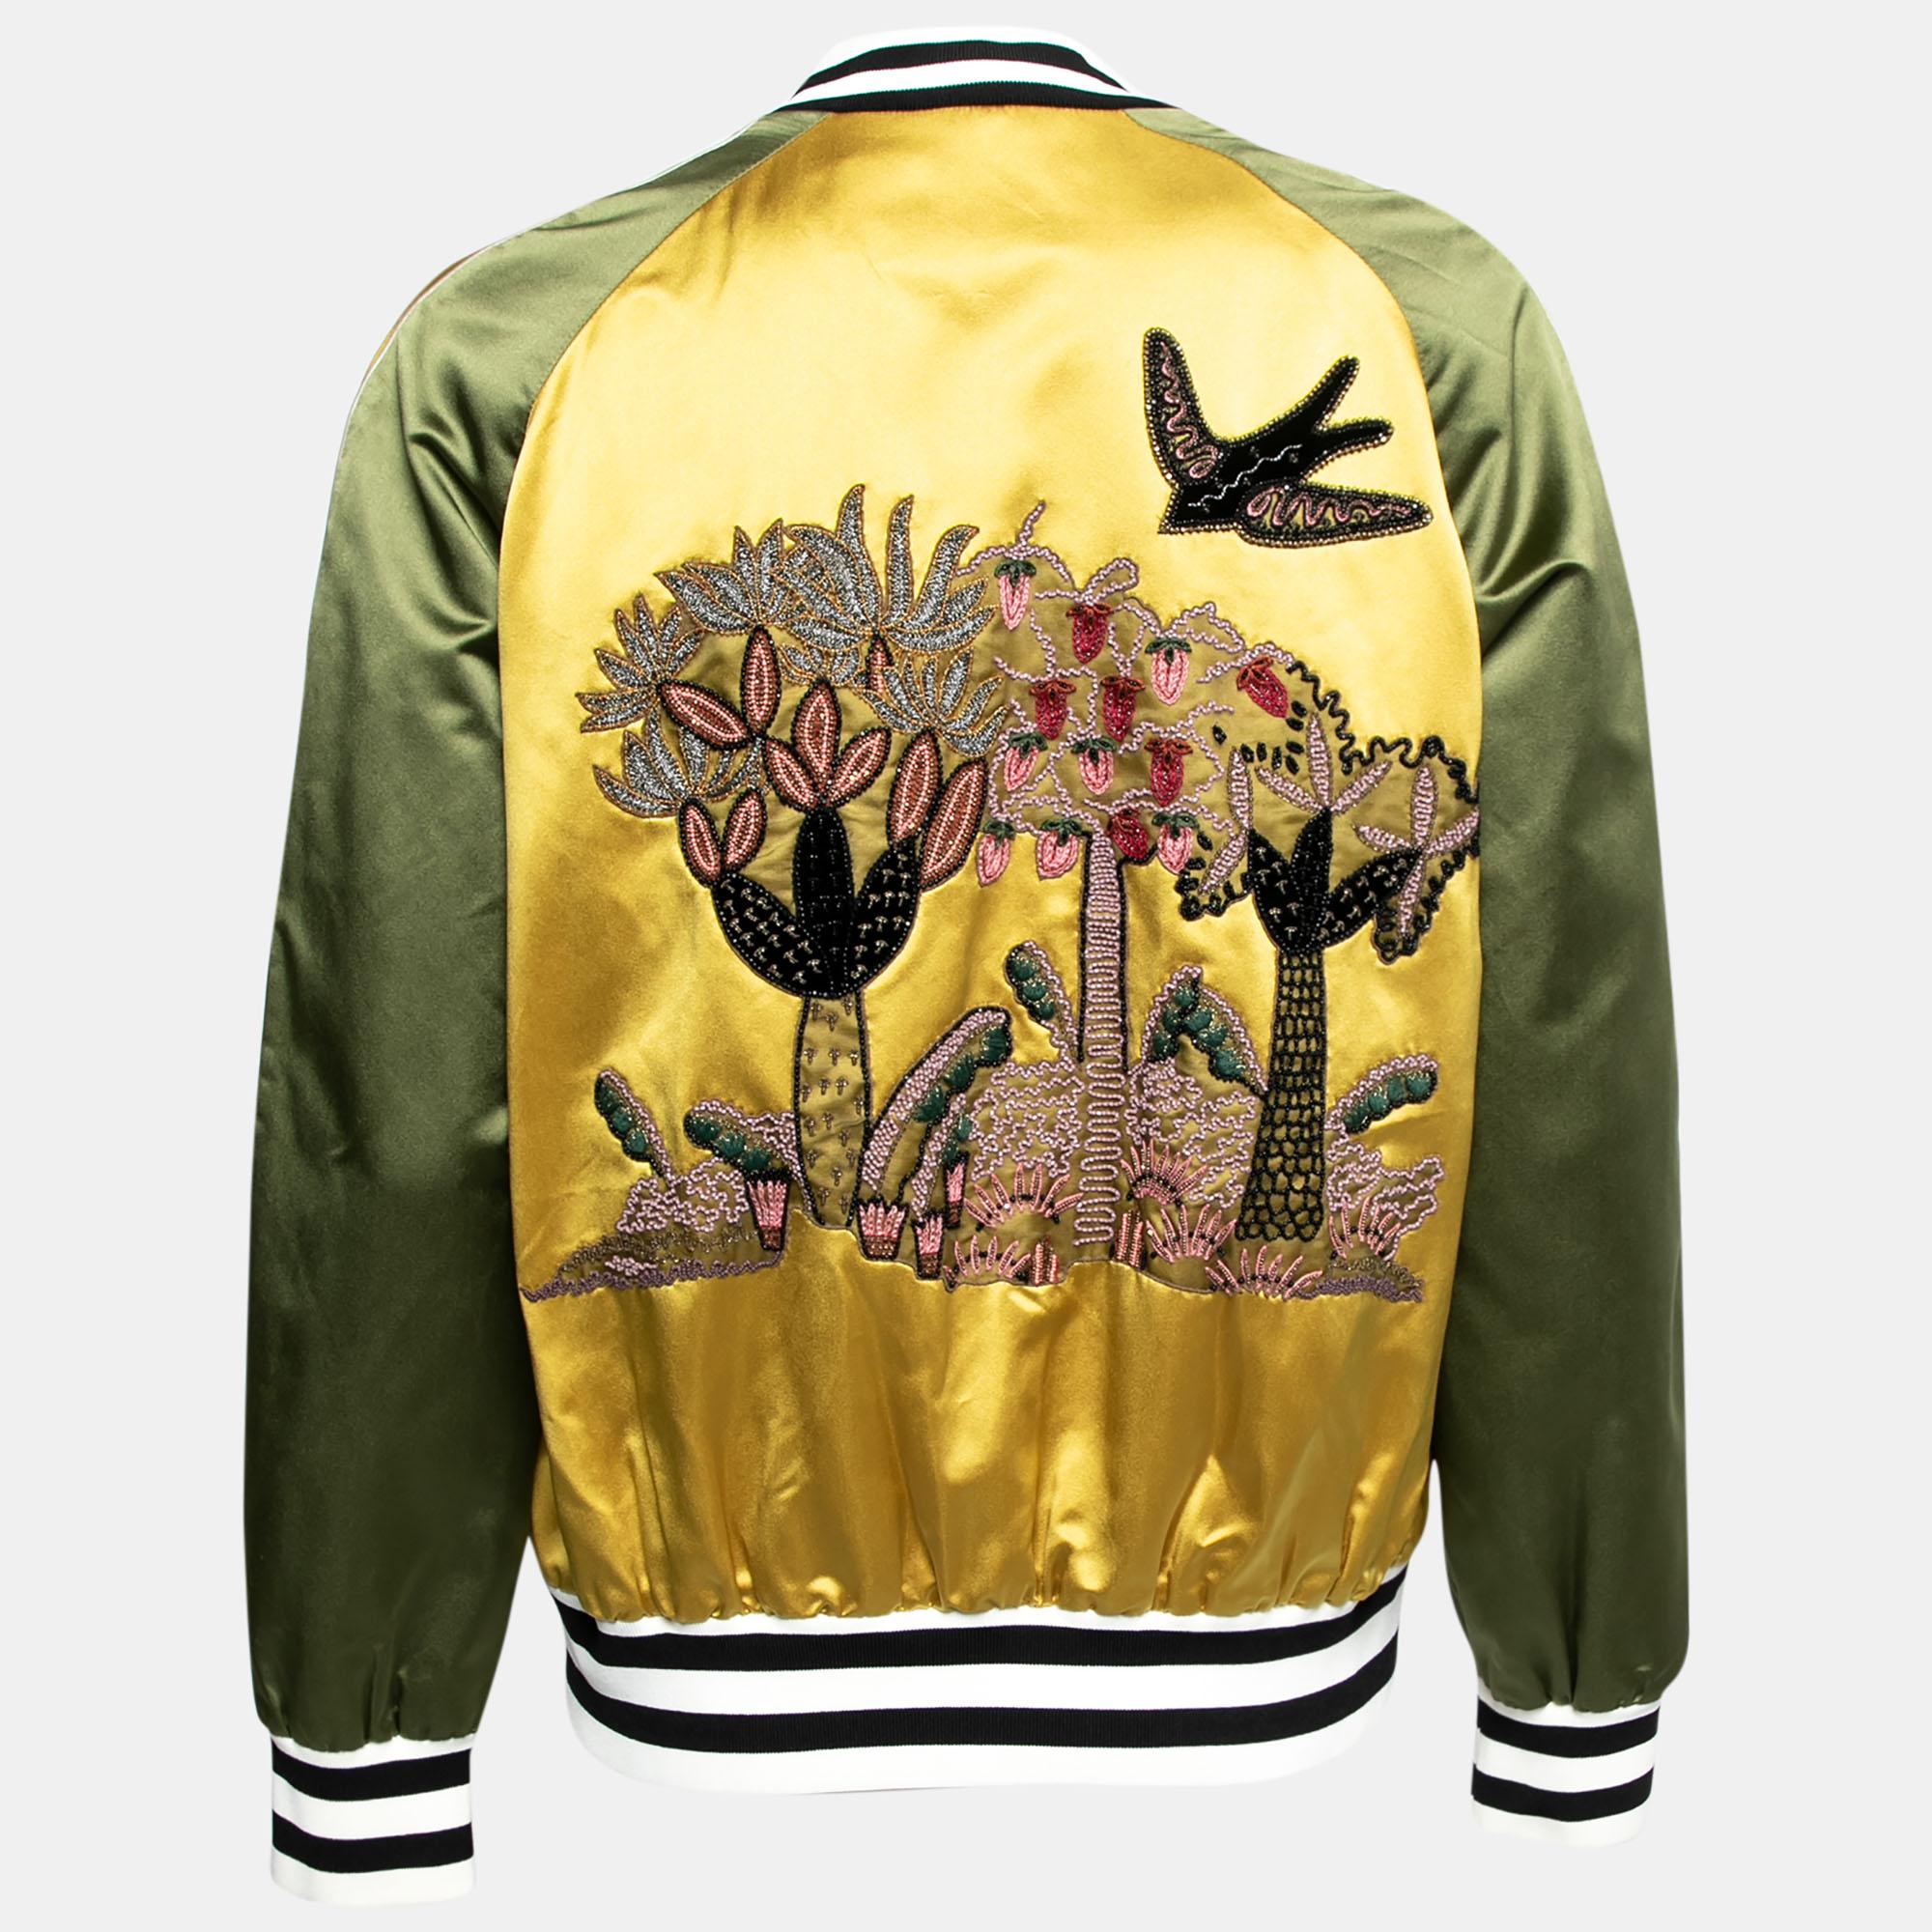 This Bomber jacket from the House of Valentino will help you sport a dapper style. It is designed using yellow-green silk satin fabric, which is augmented with embroidered patches. It has long sleeves, a zipper fastening, and two pockets. This